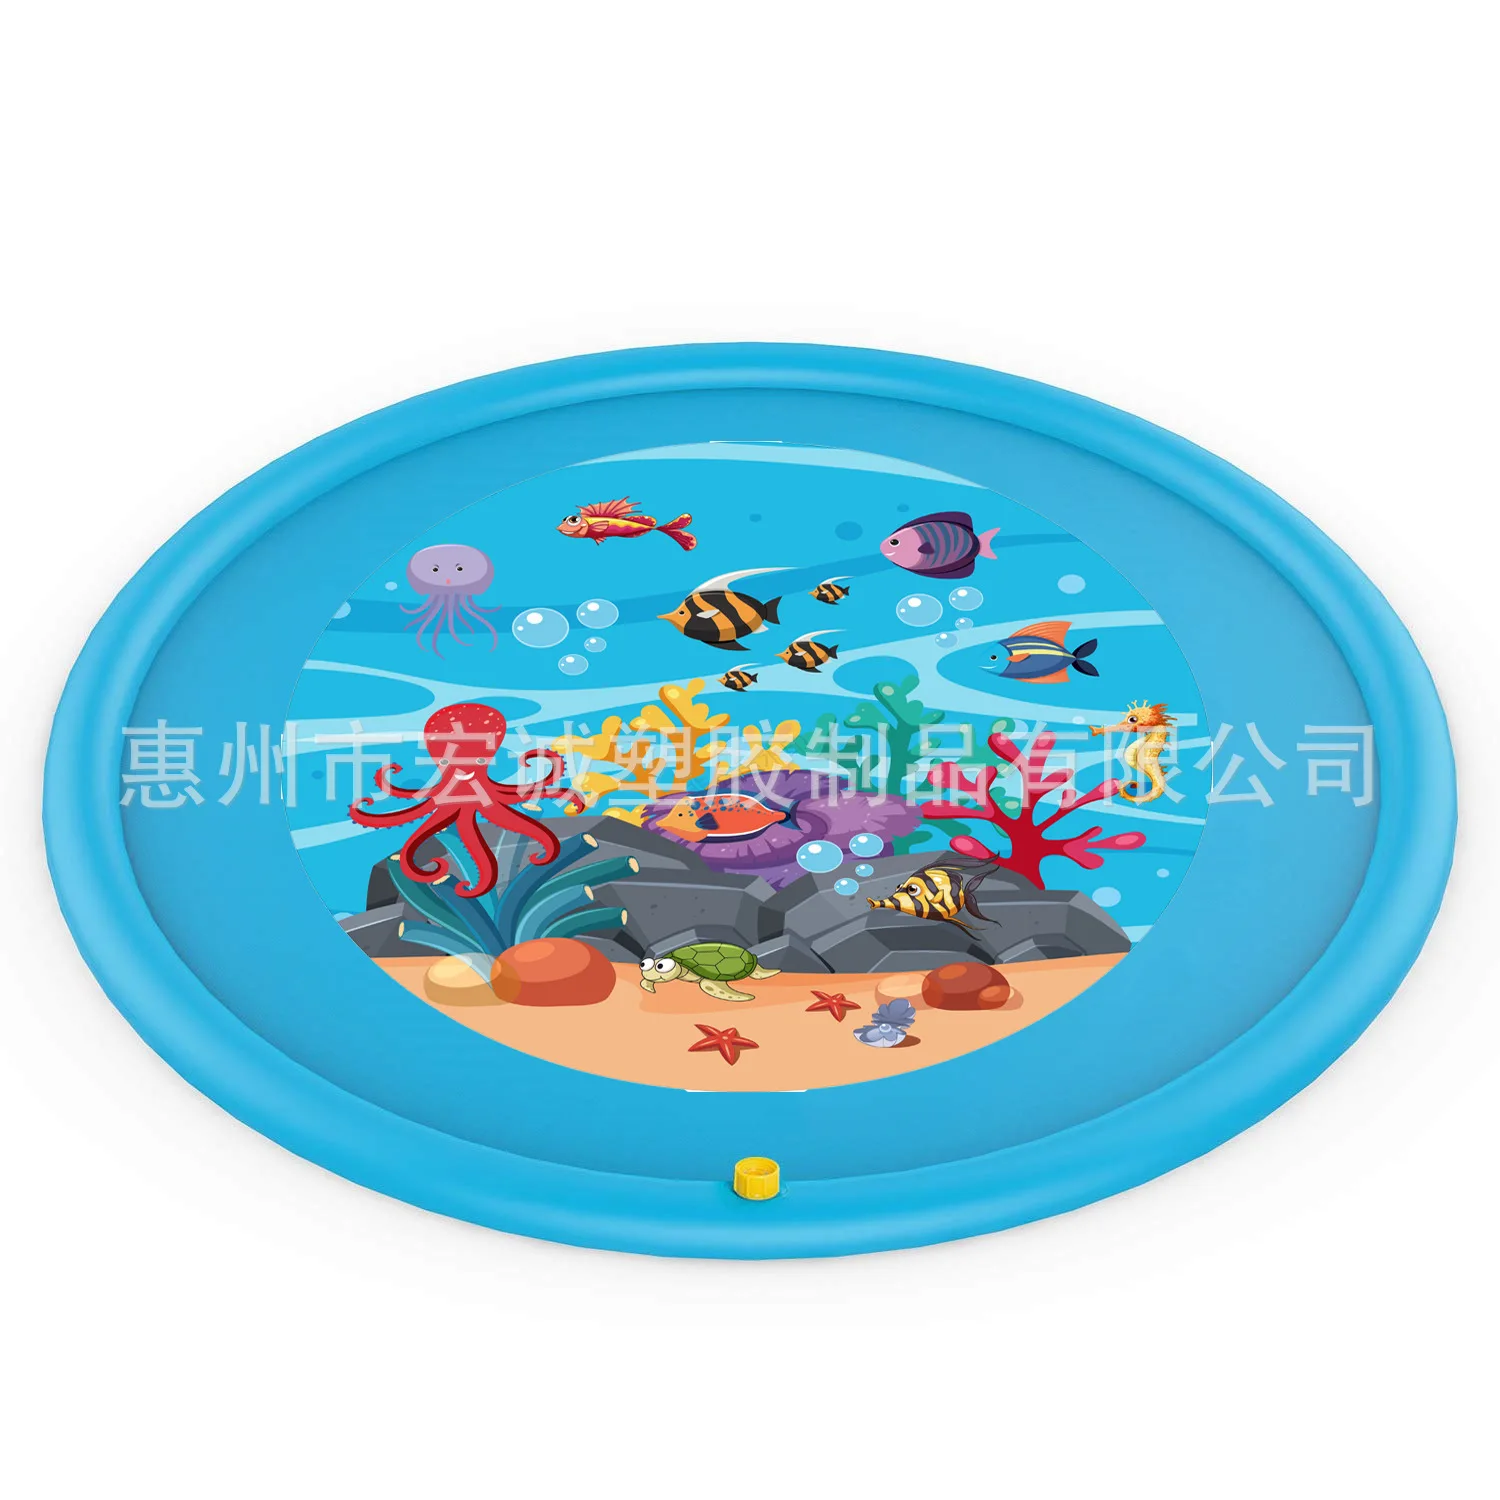 New 170CM water spray pad water spray game pad lawn